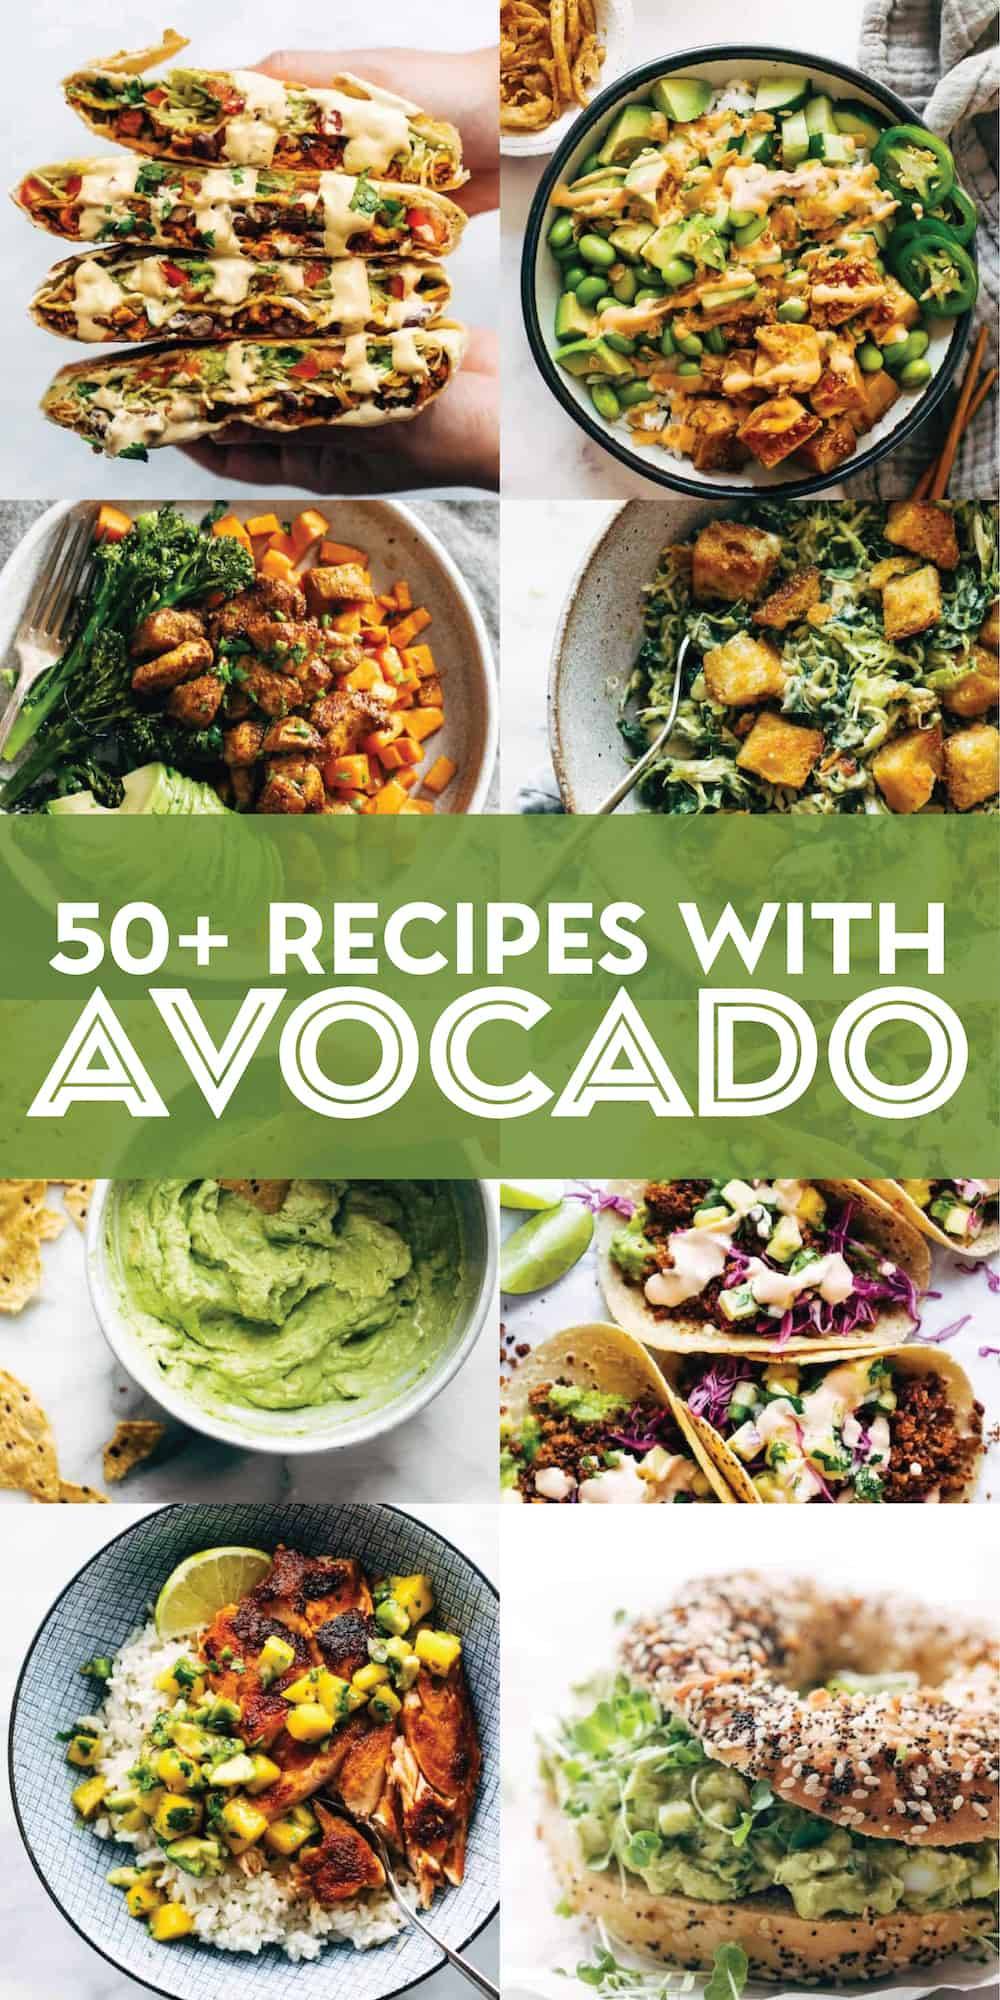 Avocado Recipes - Page 7 of 7 - Pinch of Yum